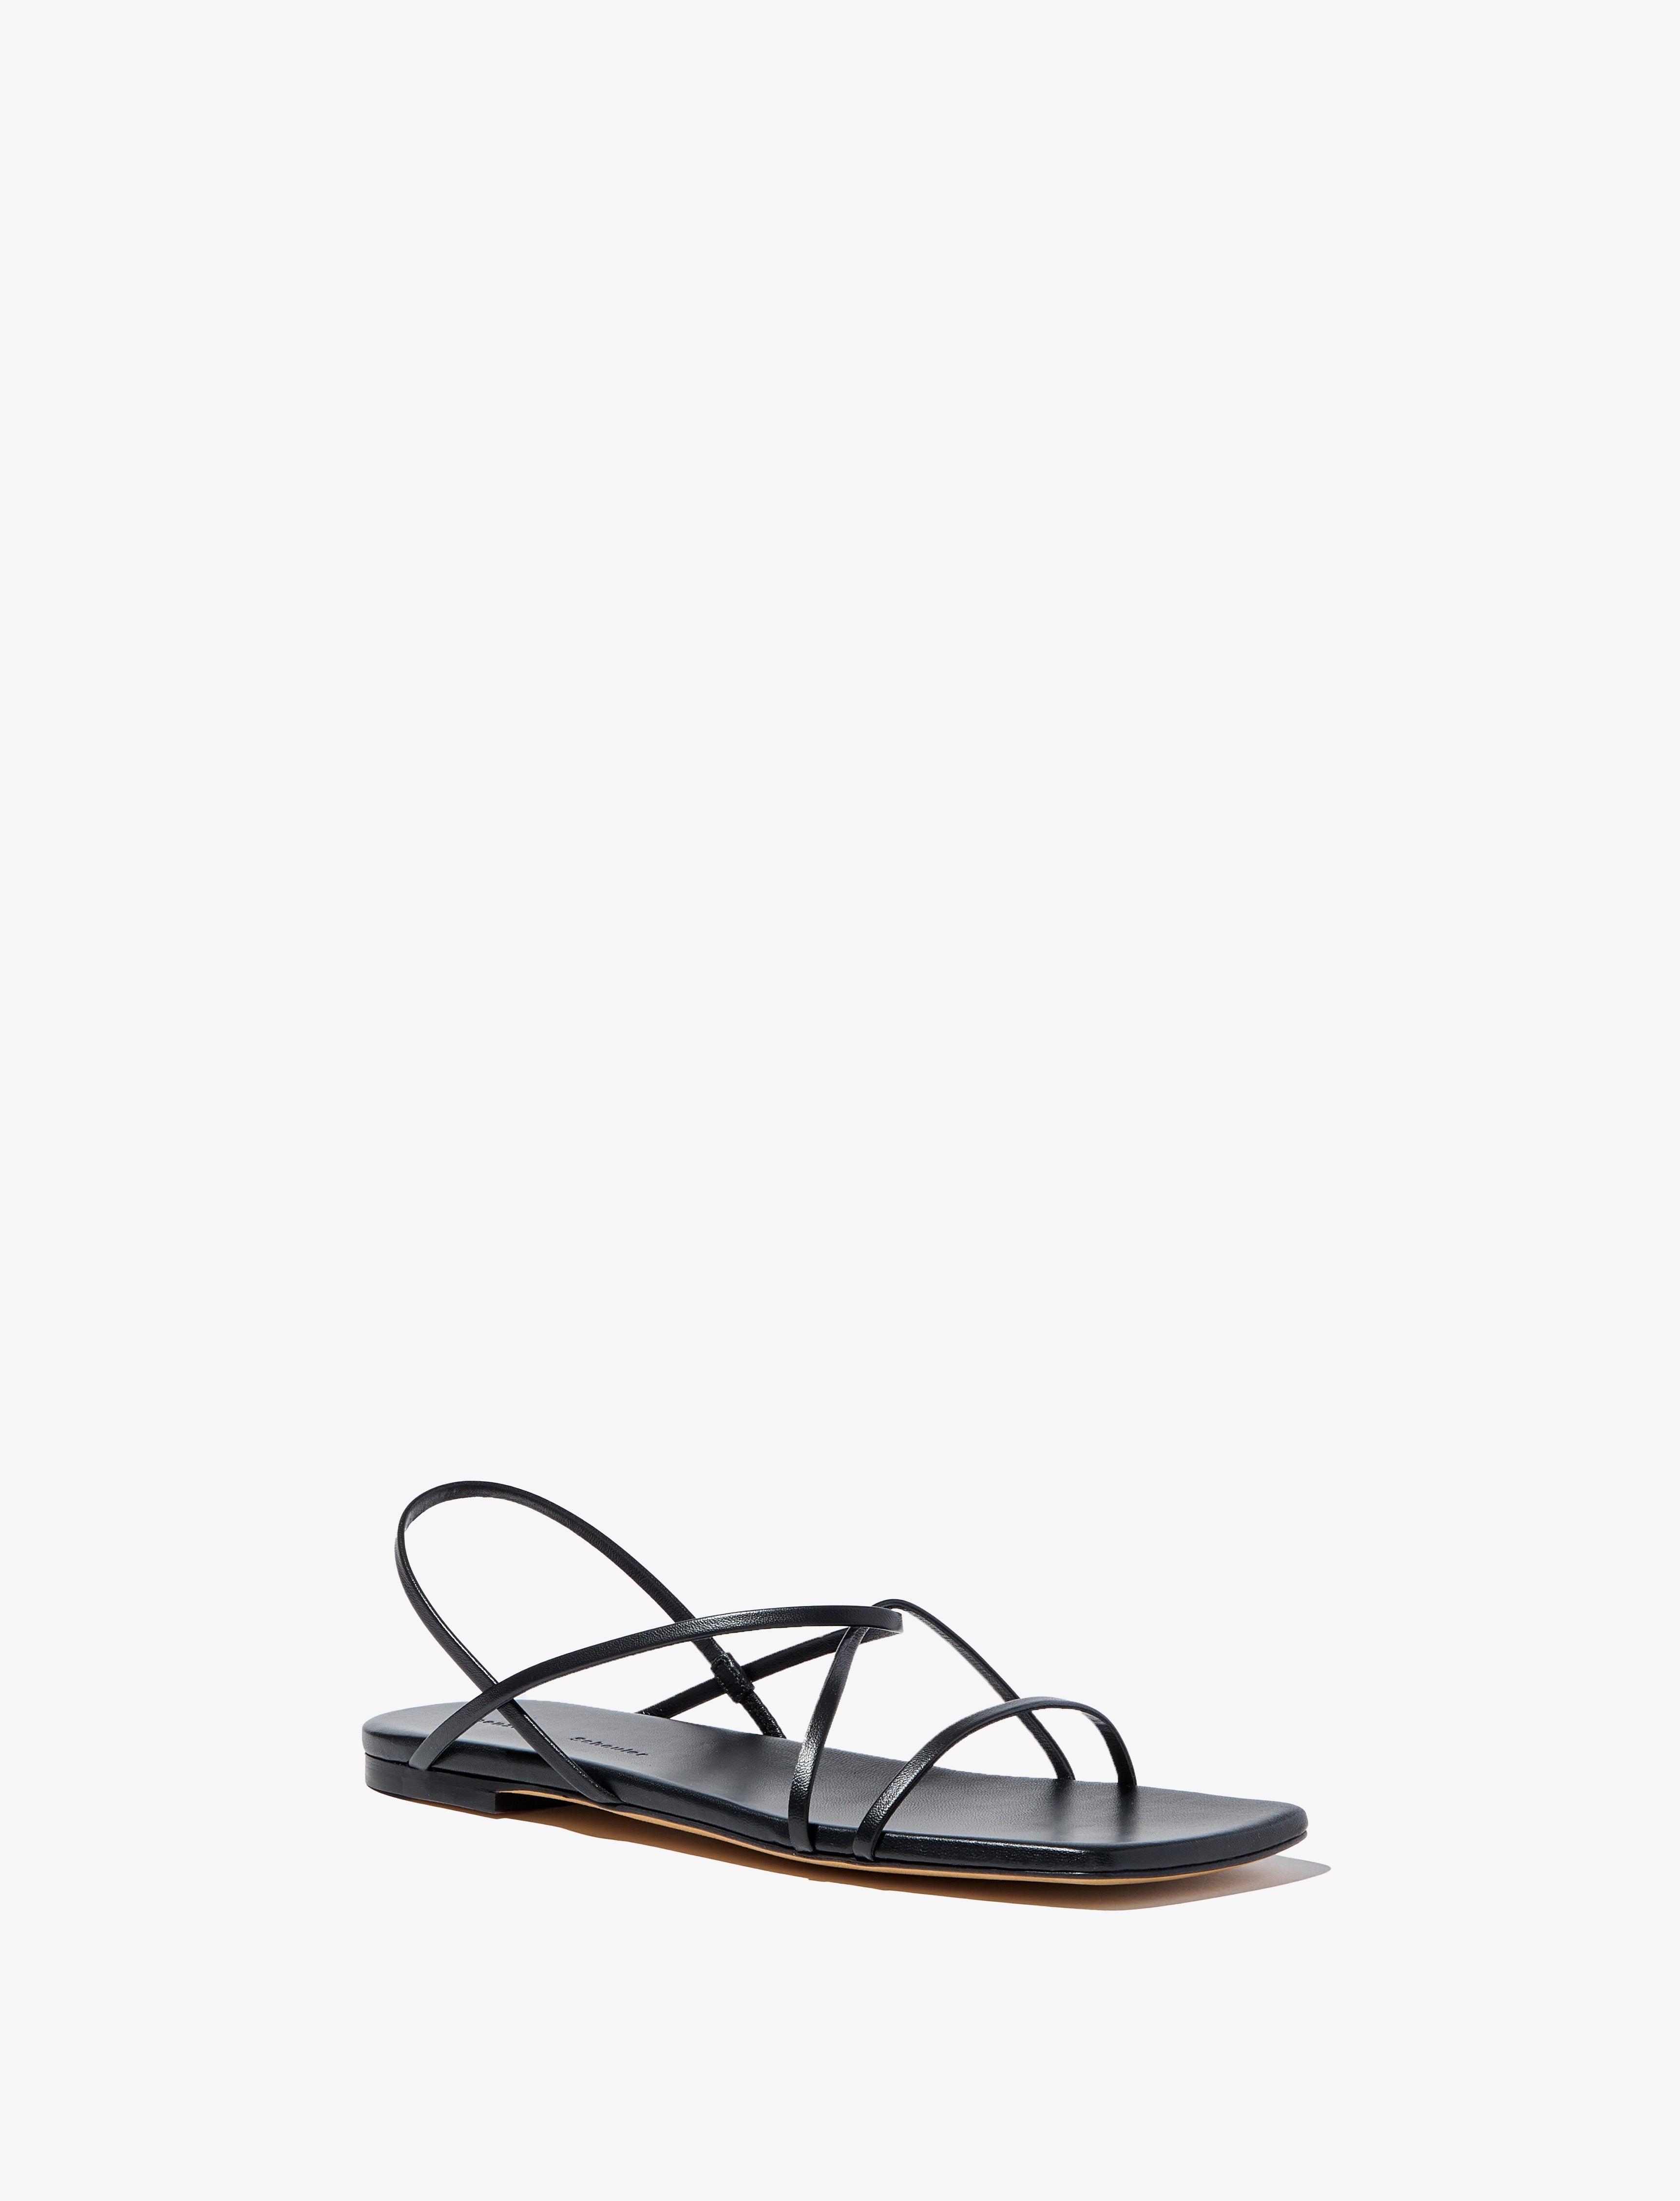 Square Flat Strappy Sandals - 2